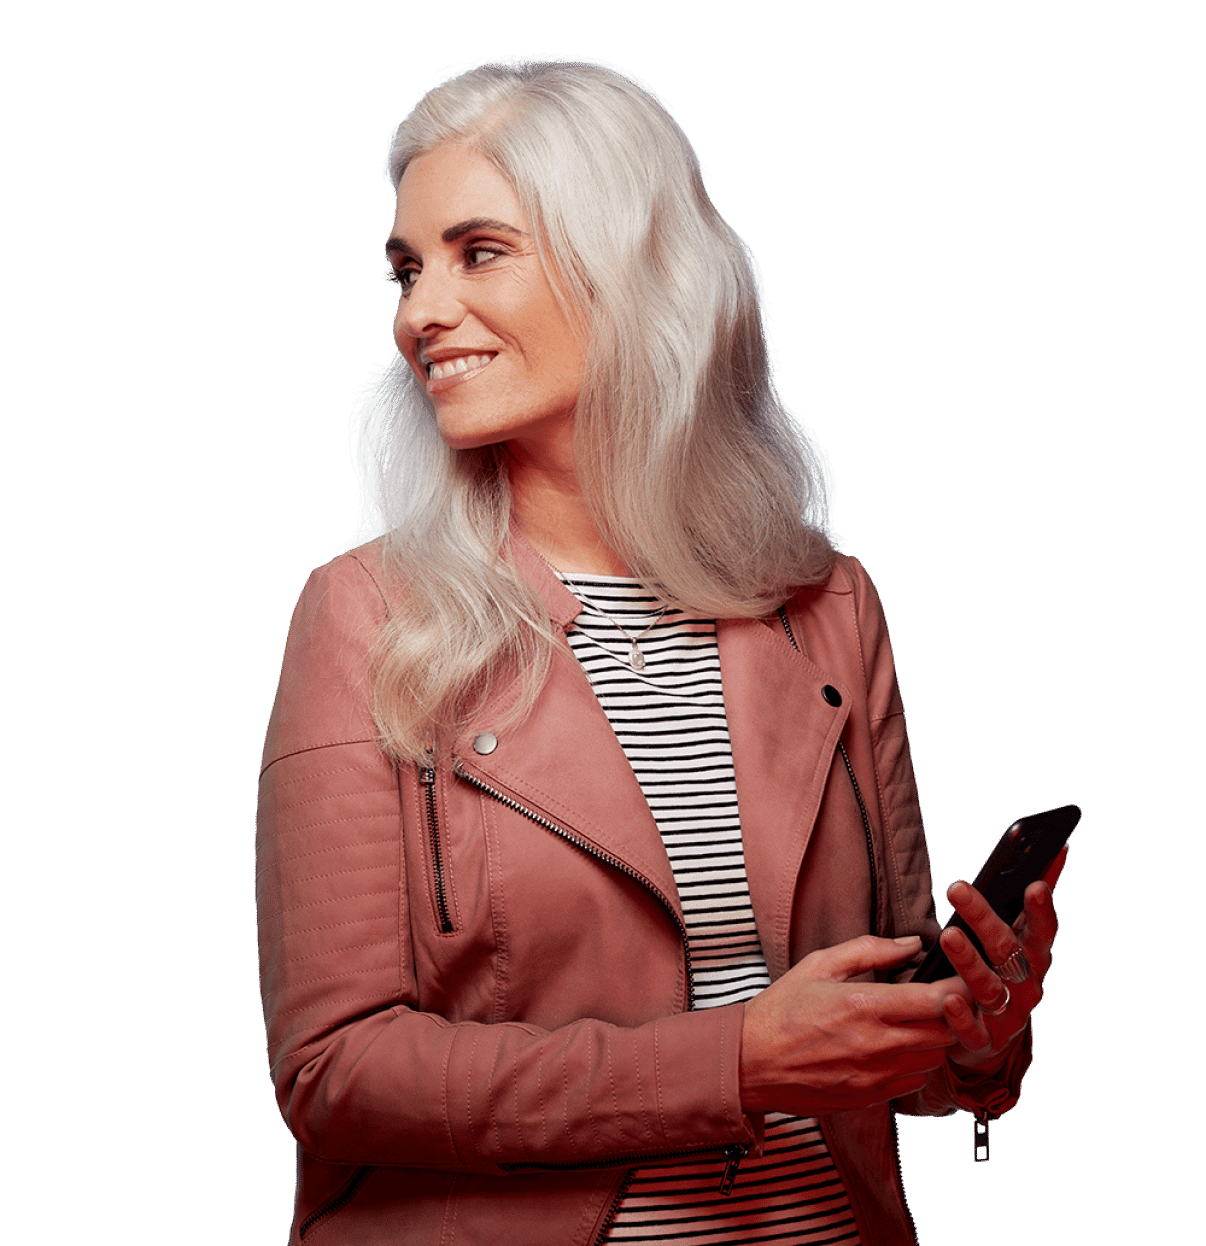 Older woman looking over her shoulder, smiling, holding a phone